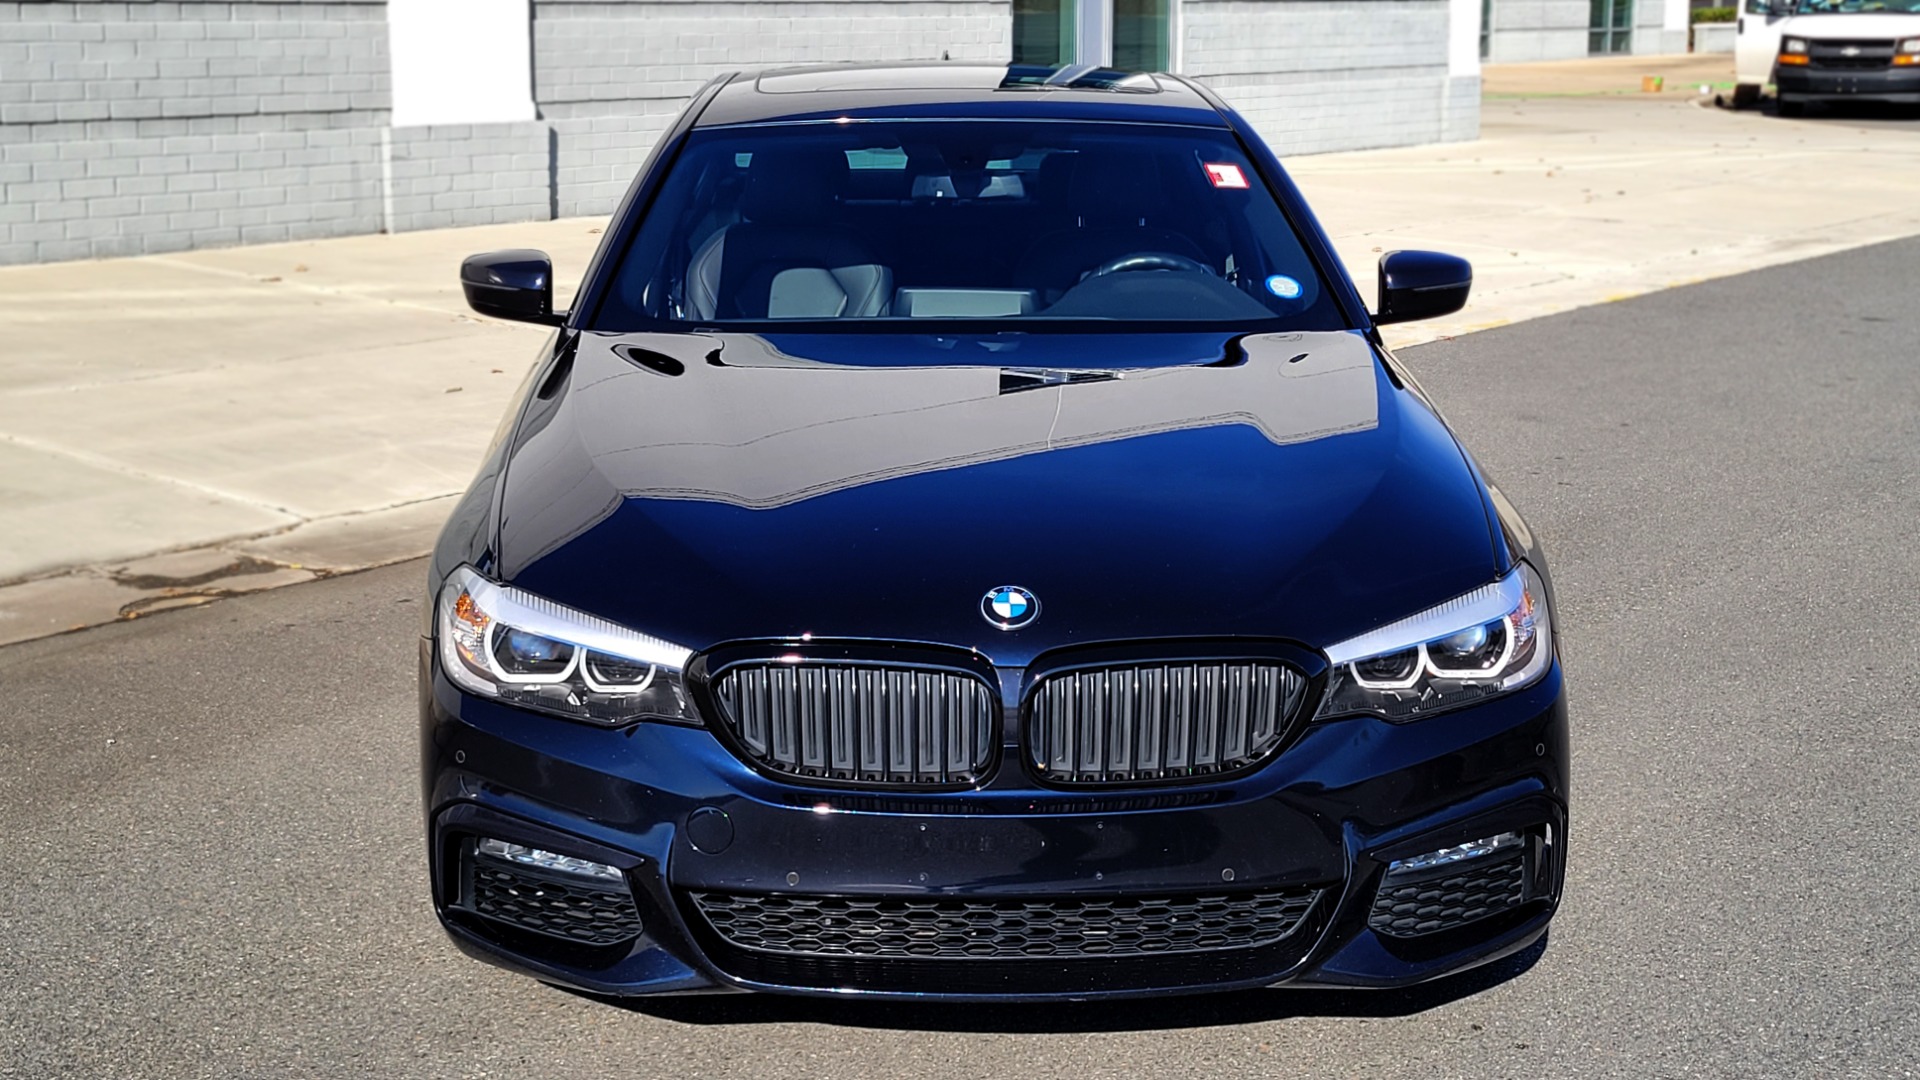 Used 2018 BMW 5 SERIES 540I XDRIVE 3.0L / M-SPORT / NAV / WIFI / SUNROOF / REARVIEW for sale Sold at Formula Imports in Charlotte NC 28227 11